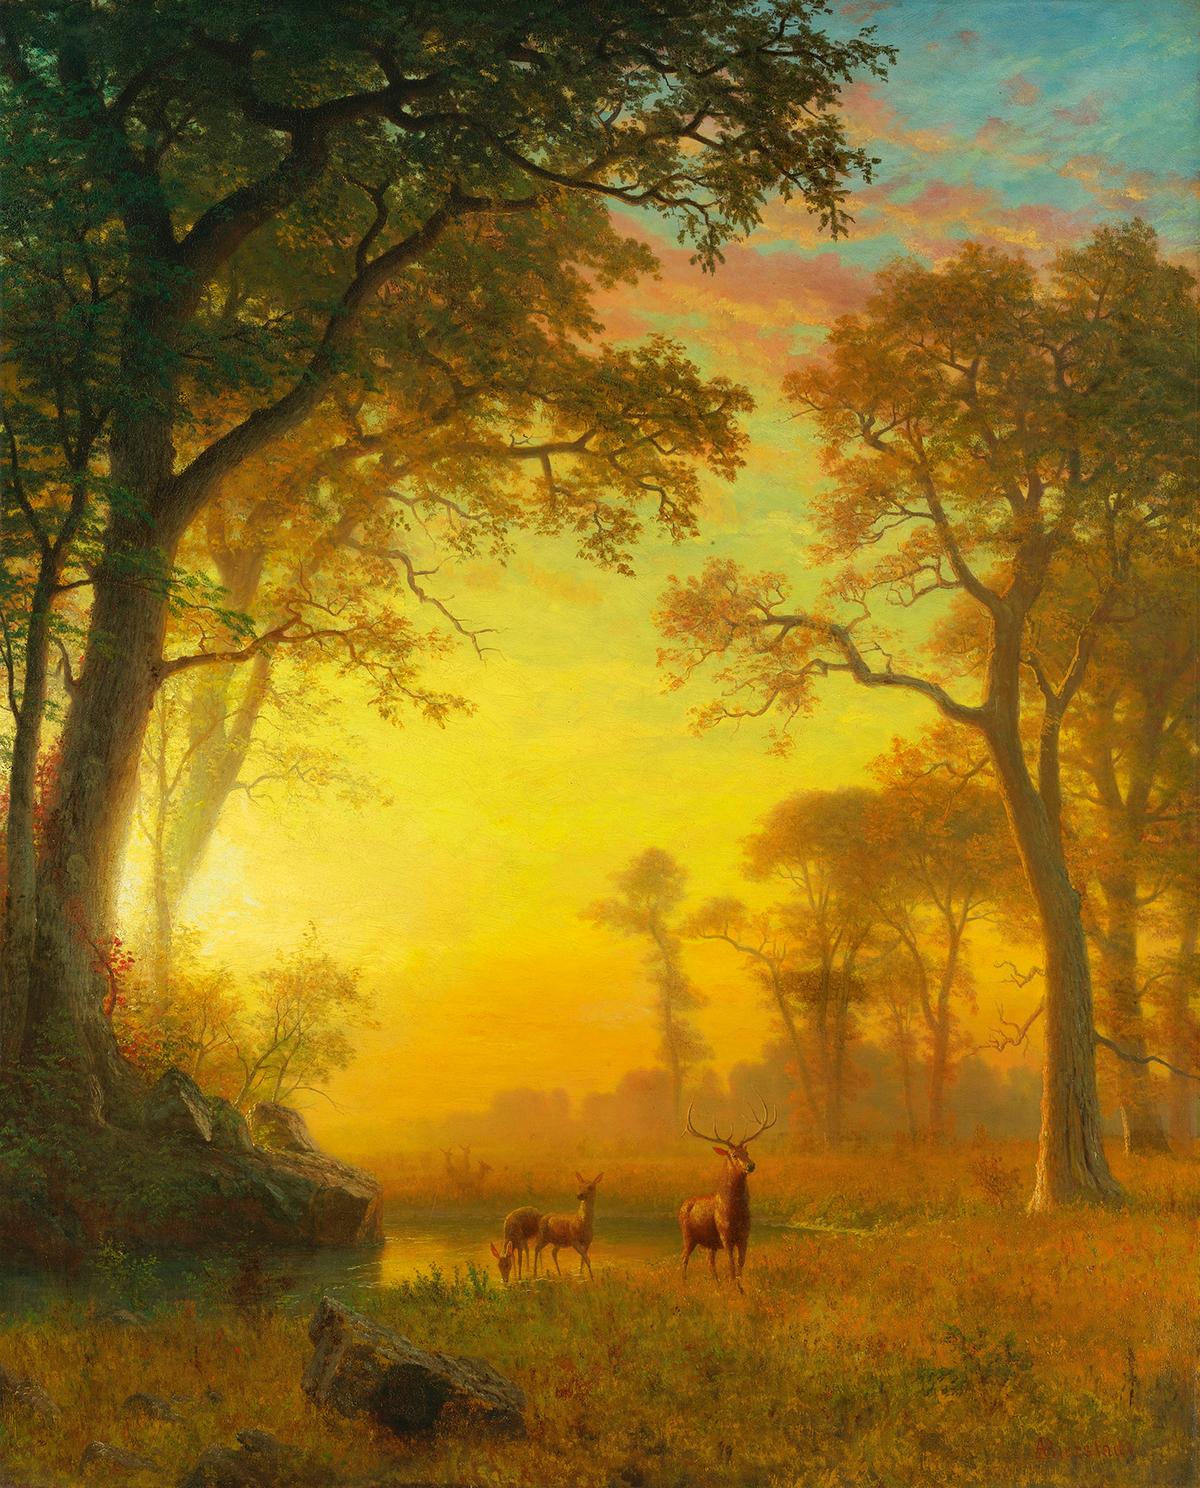 “Light in the Forest,” 1870s, by Albert Bierstadt. Oil on canvas; 51.9 inches by 42.1 inches. Private collection. (Public Domain)